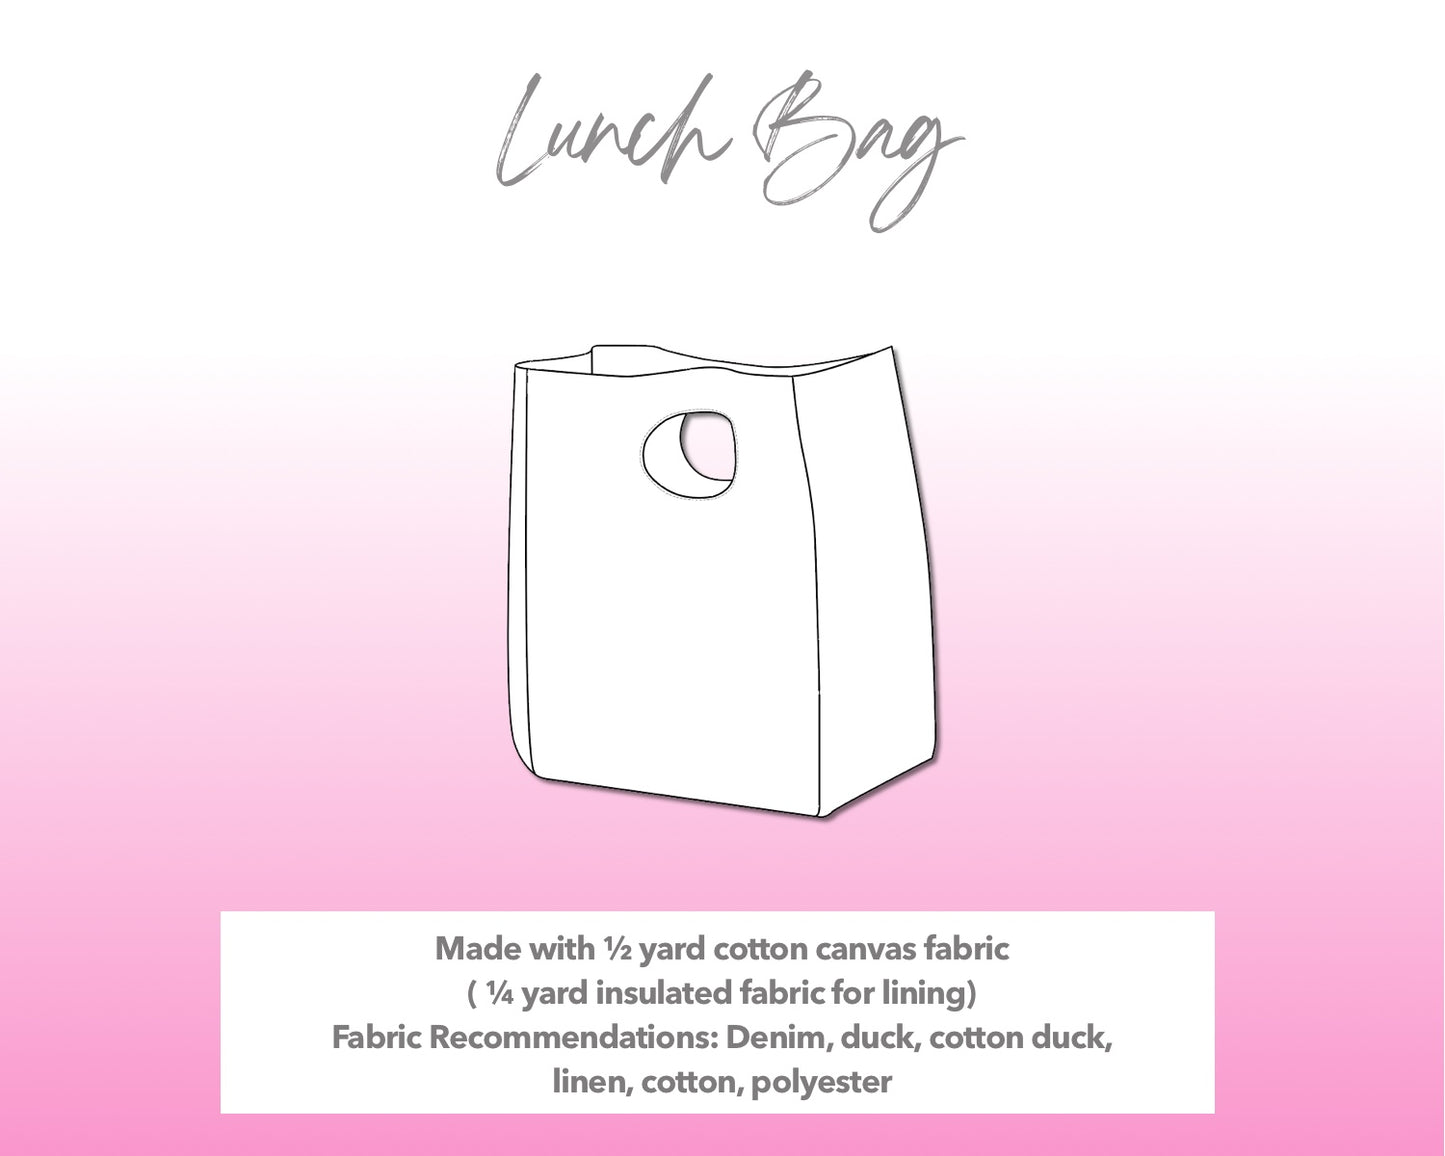 Illustration and detailed description for Lunch Bag sewing pattern.